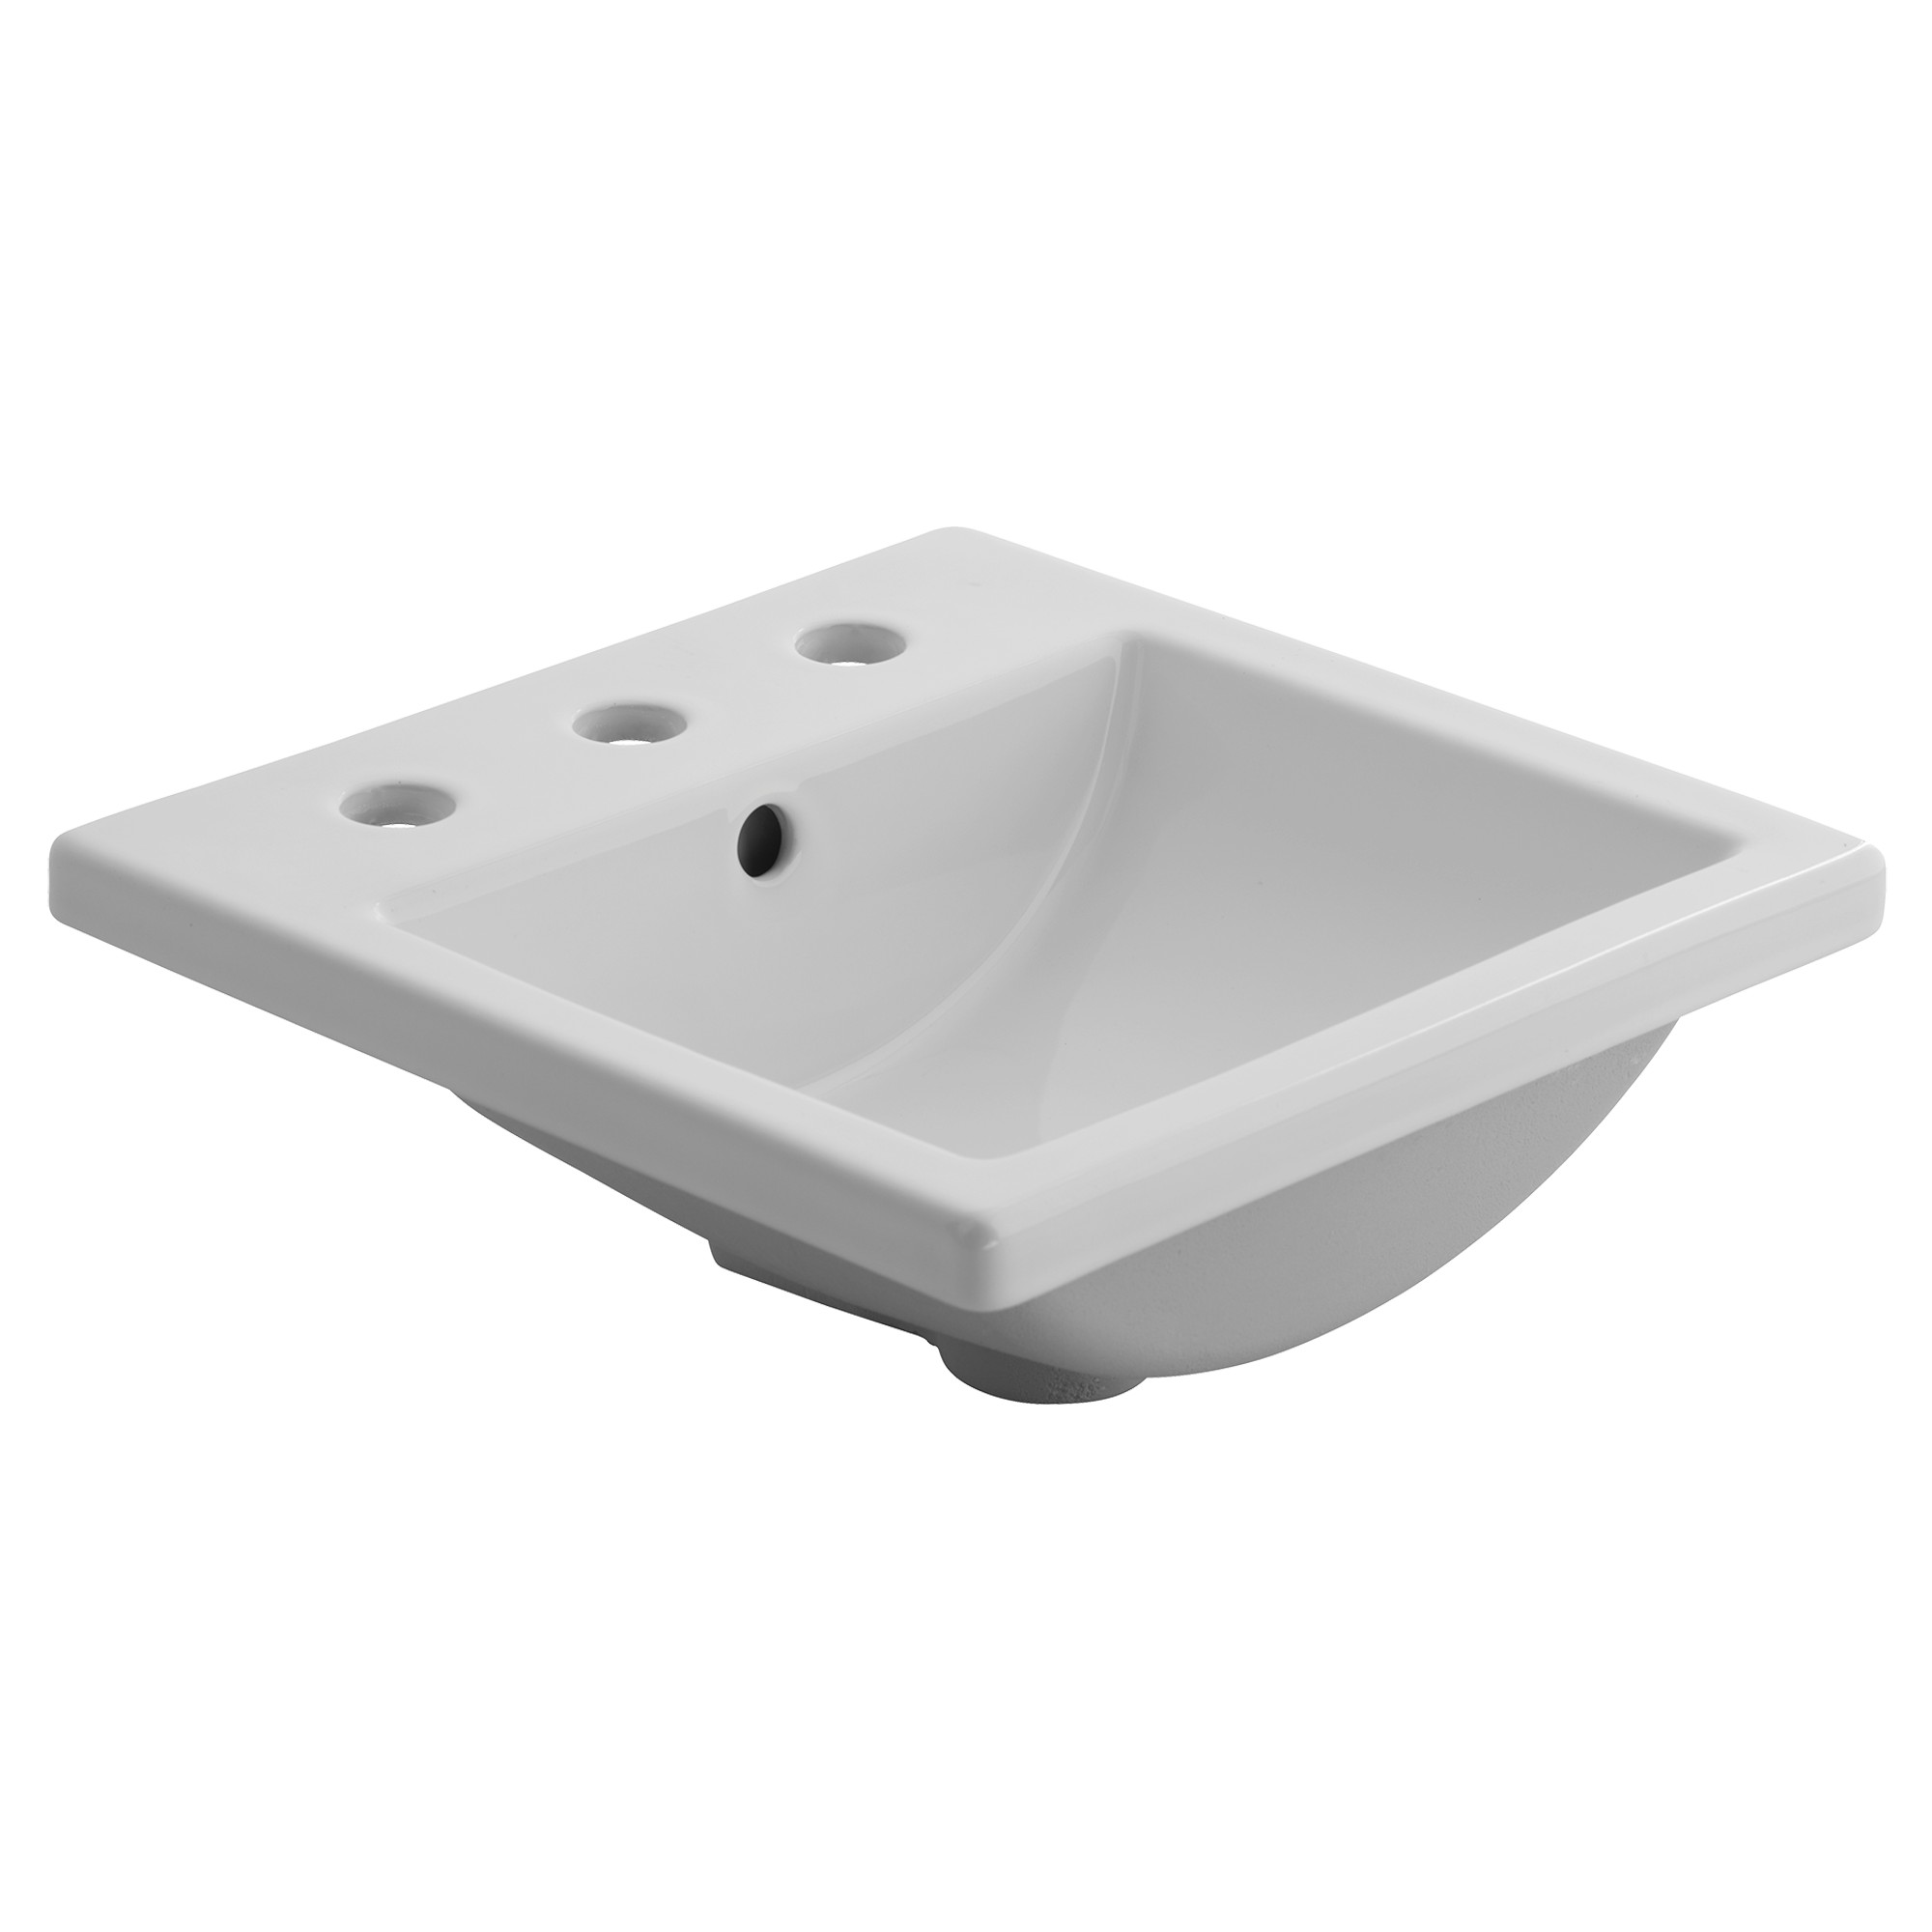 American Standard | 0642.008.020 | AMERICAN STANDARD 0642.008 STUDIO CARRE SINK WITH 8" CENTERS 020 WHITE 16.25X16.25